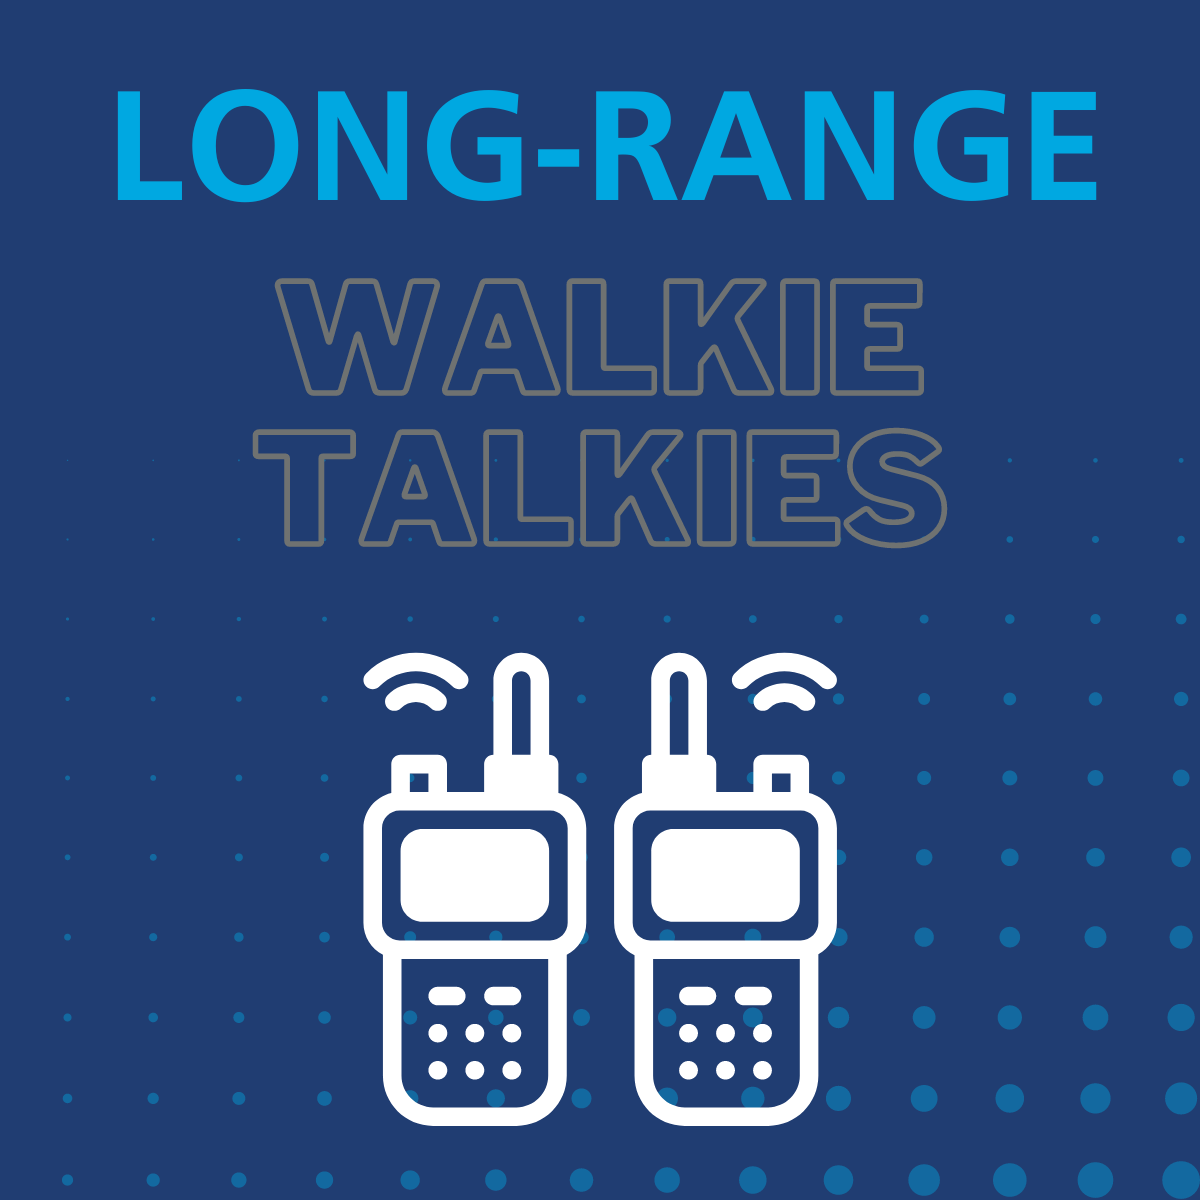 How to Make Long Range Walkie Talkies Go the Extra Mile